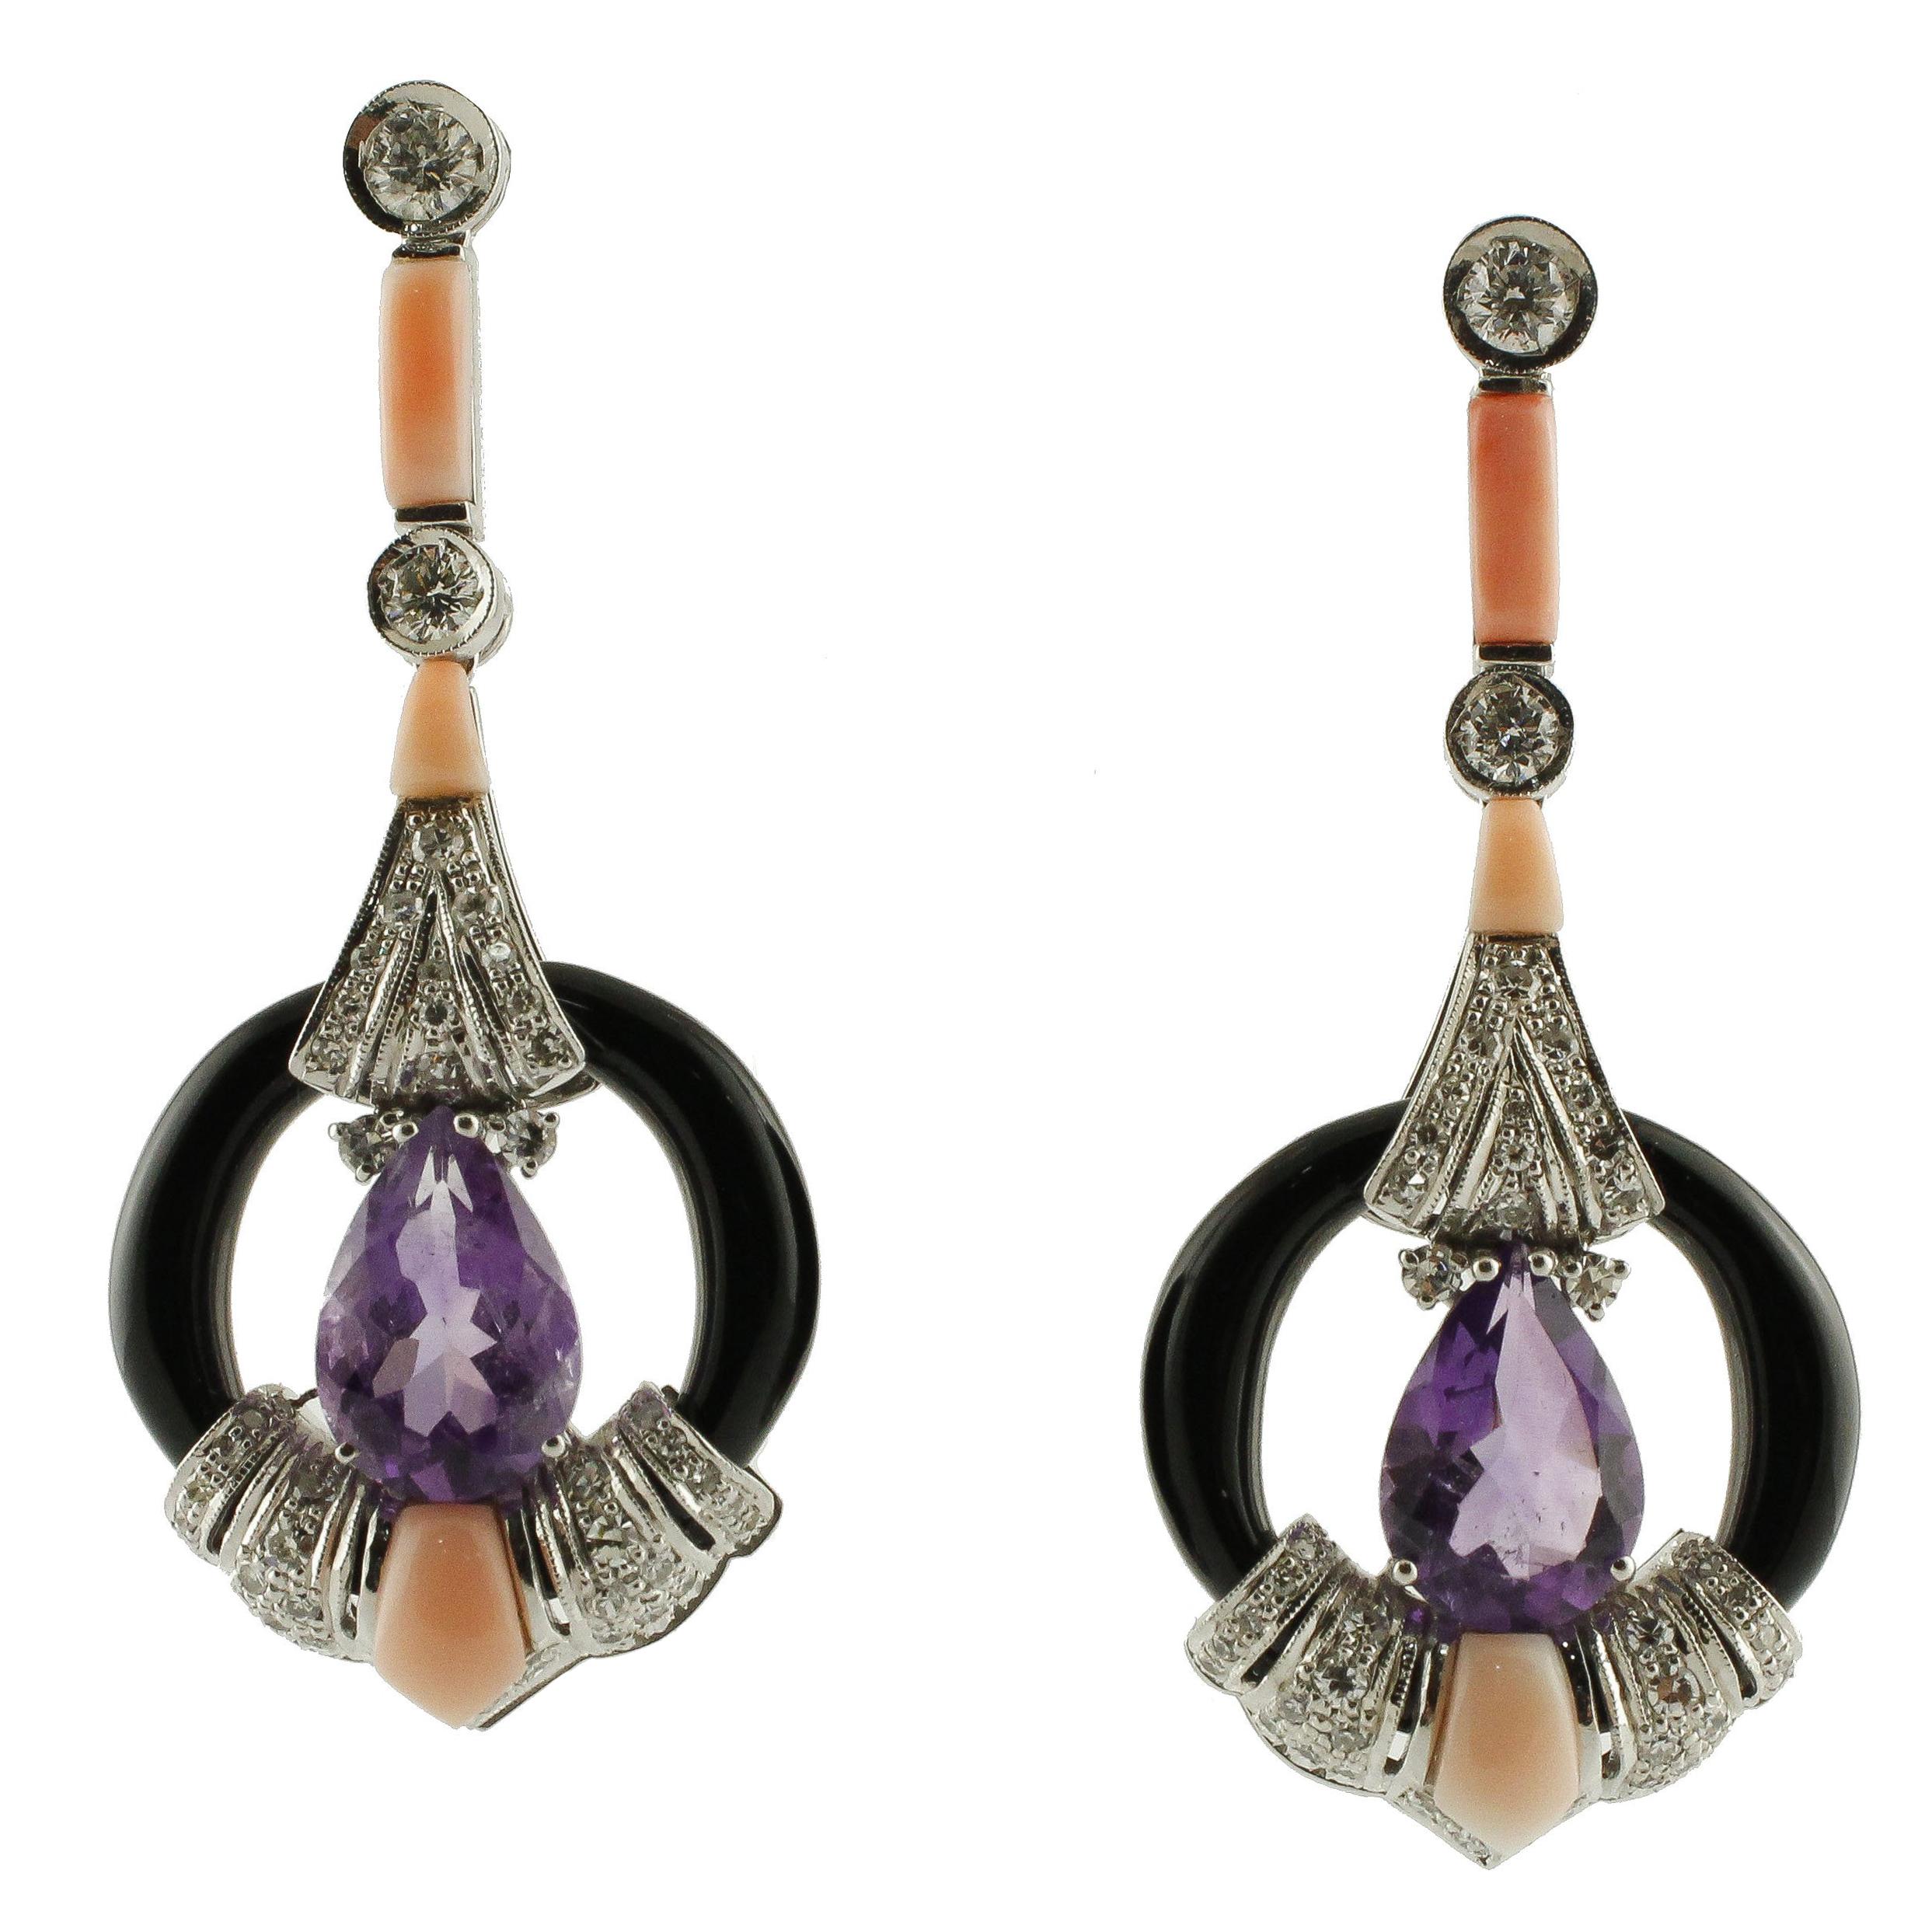 Diamonds, Amethyst Drops, Pink Coral, Onyx Rings, 14K White Gold Dangle Earrings For Sale